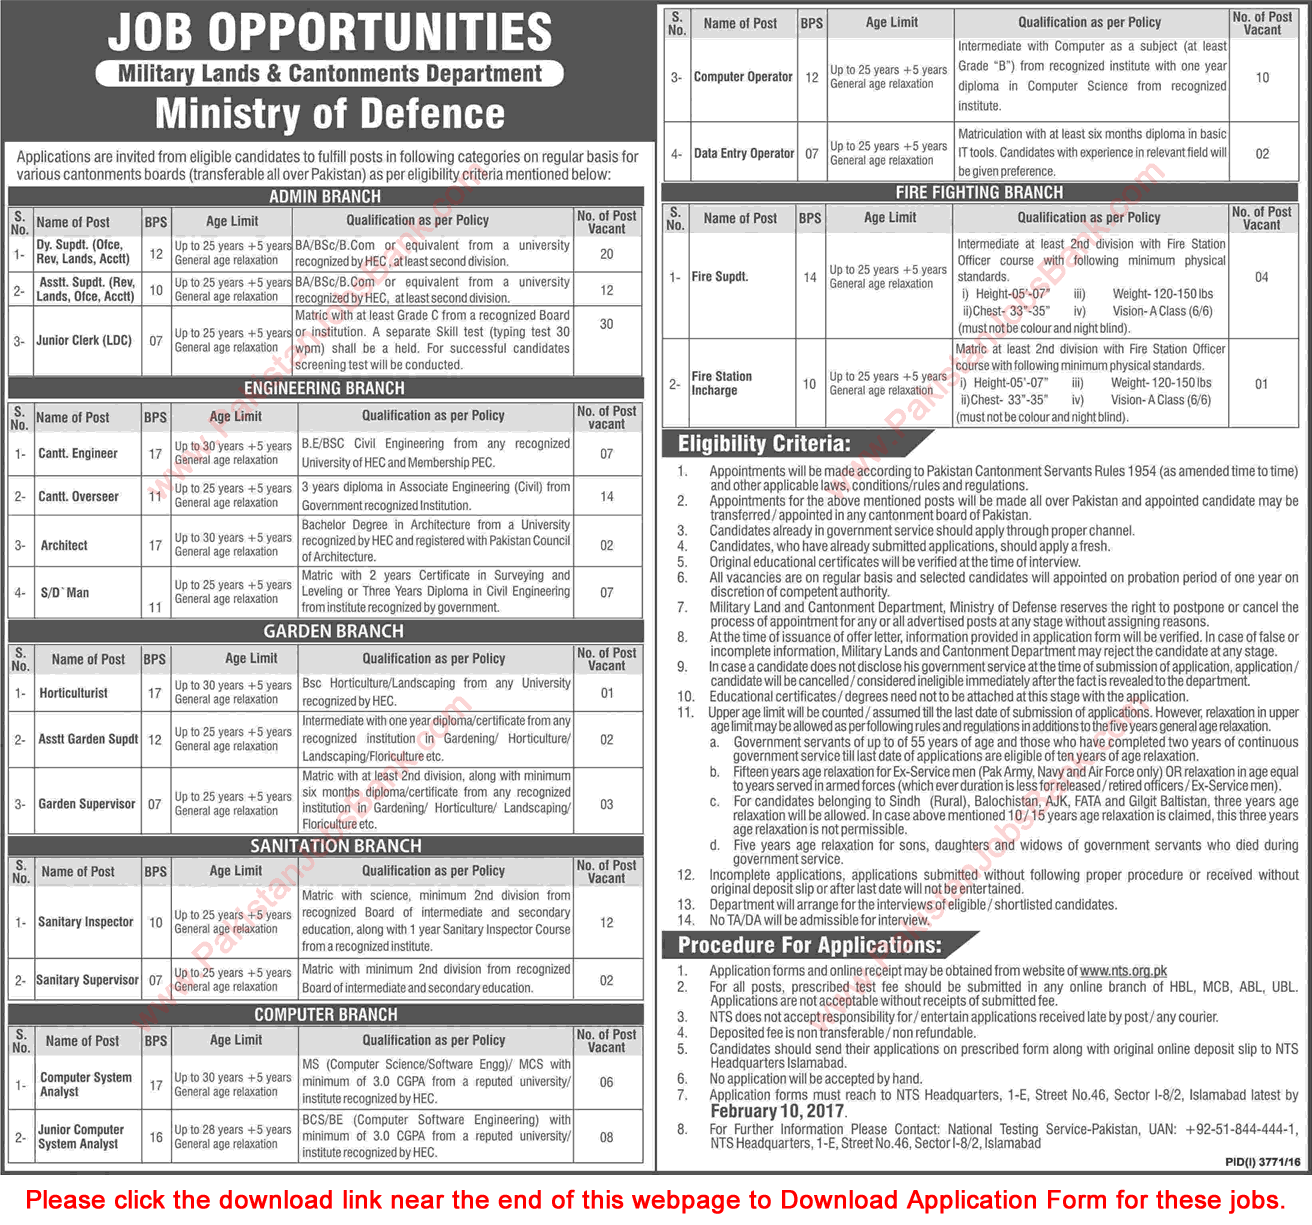 Military Lands and Cantonments Department Jobs 2017 NTS Application Form Download Latest